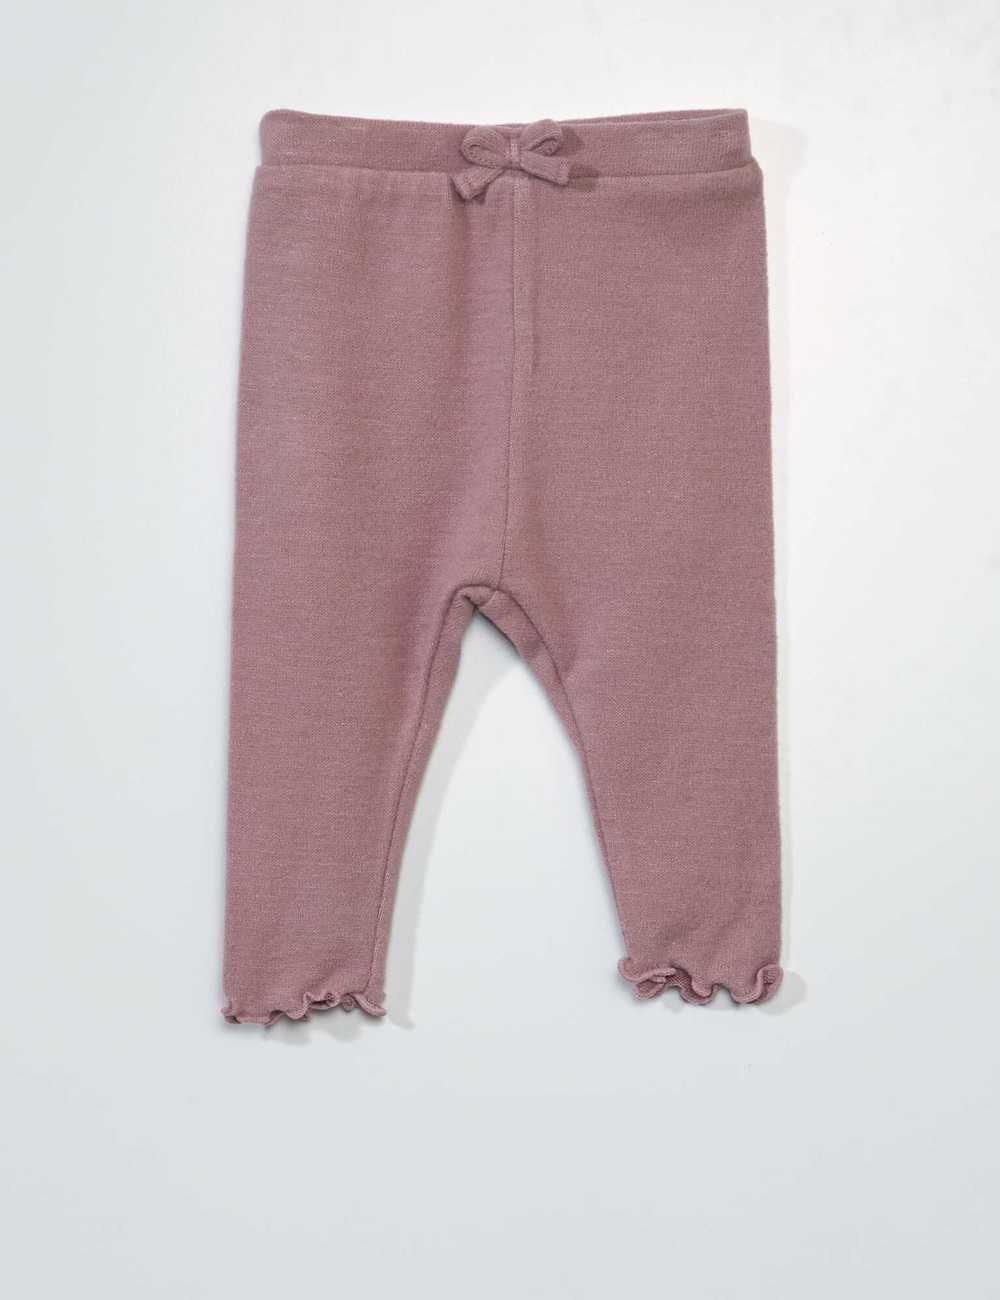 Buy Soft knit leggings and sweater - 2-piece set Online in Dubai